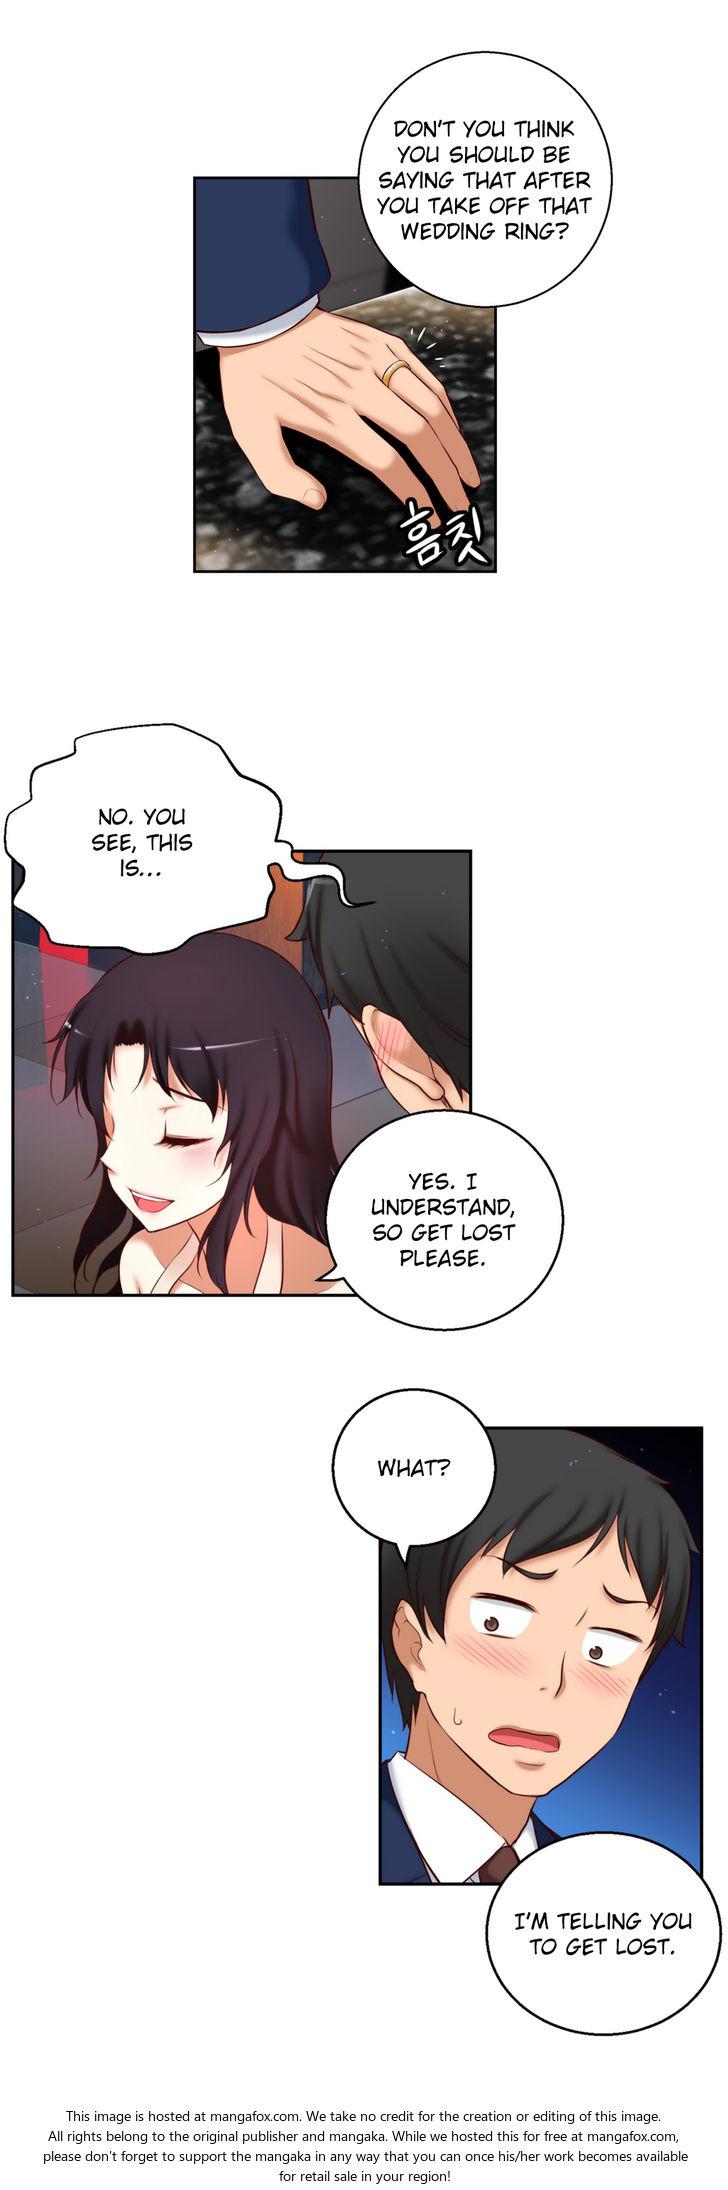 [Donggul Gom] She is Young (English) Part 1/2 978